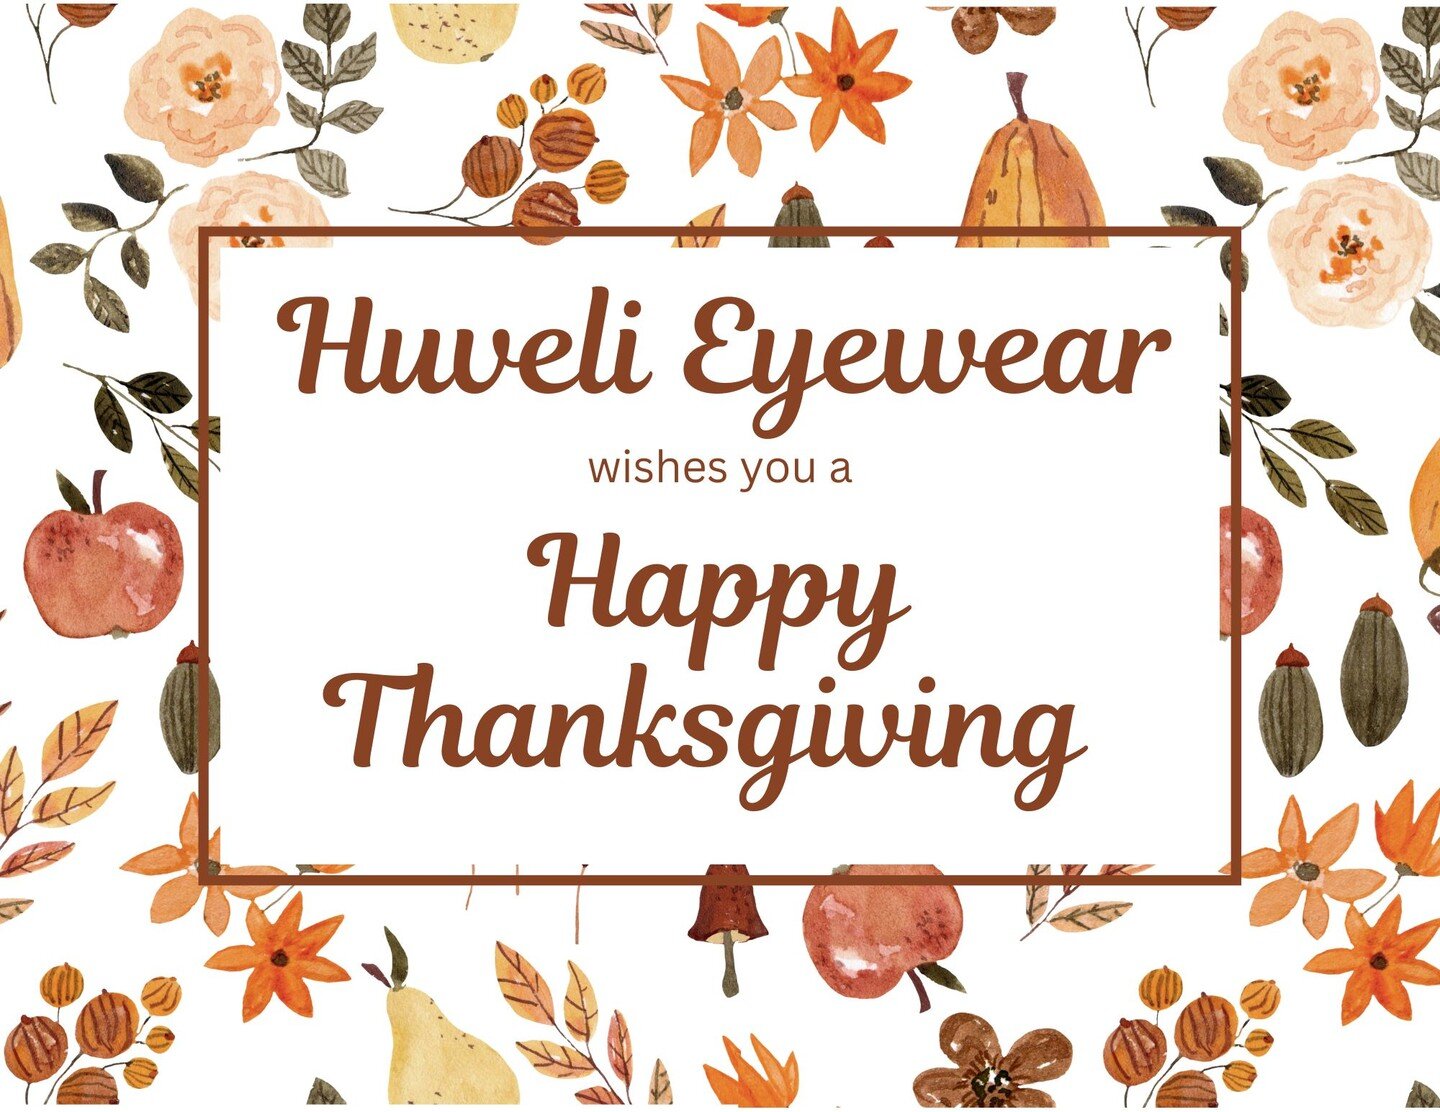 Huveli Eyewear would to like to extend our warmest wishes to everyone during the Thanksgiving holiday! We will be closed tomorrow, November 24th and will reopen on Friday, November 25th.
We hope everyone has a safe, happy, and healthy holiday! 🧡🦃